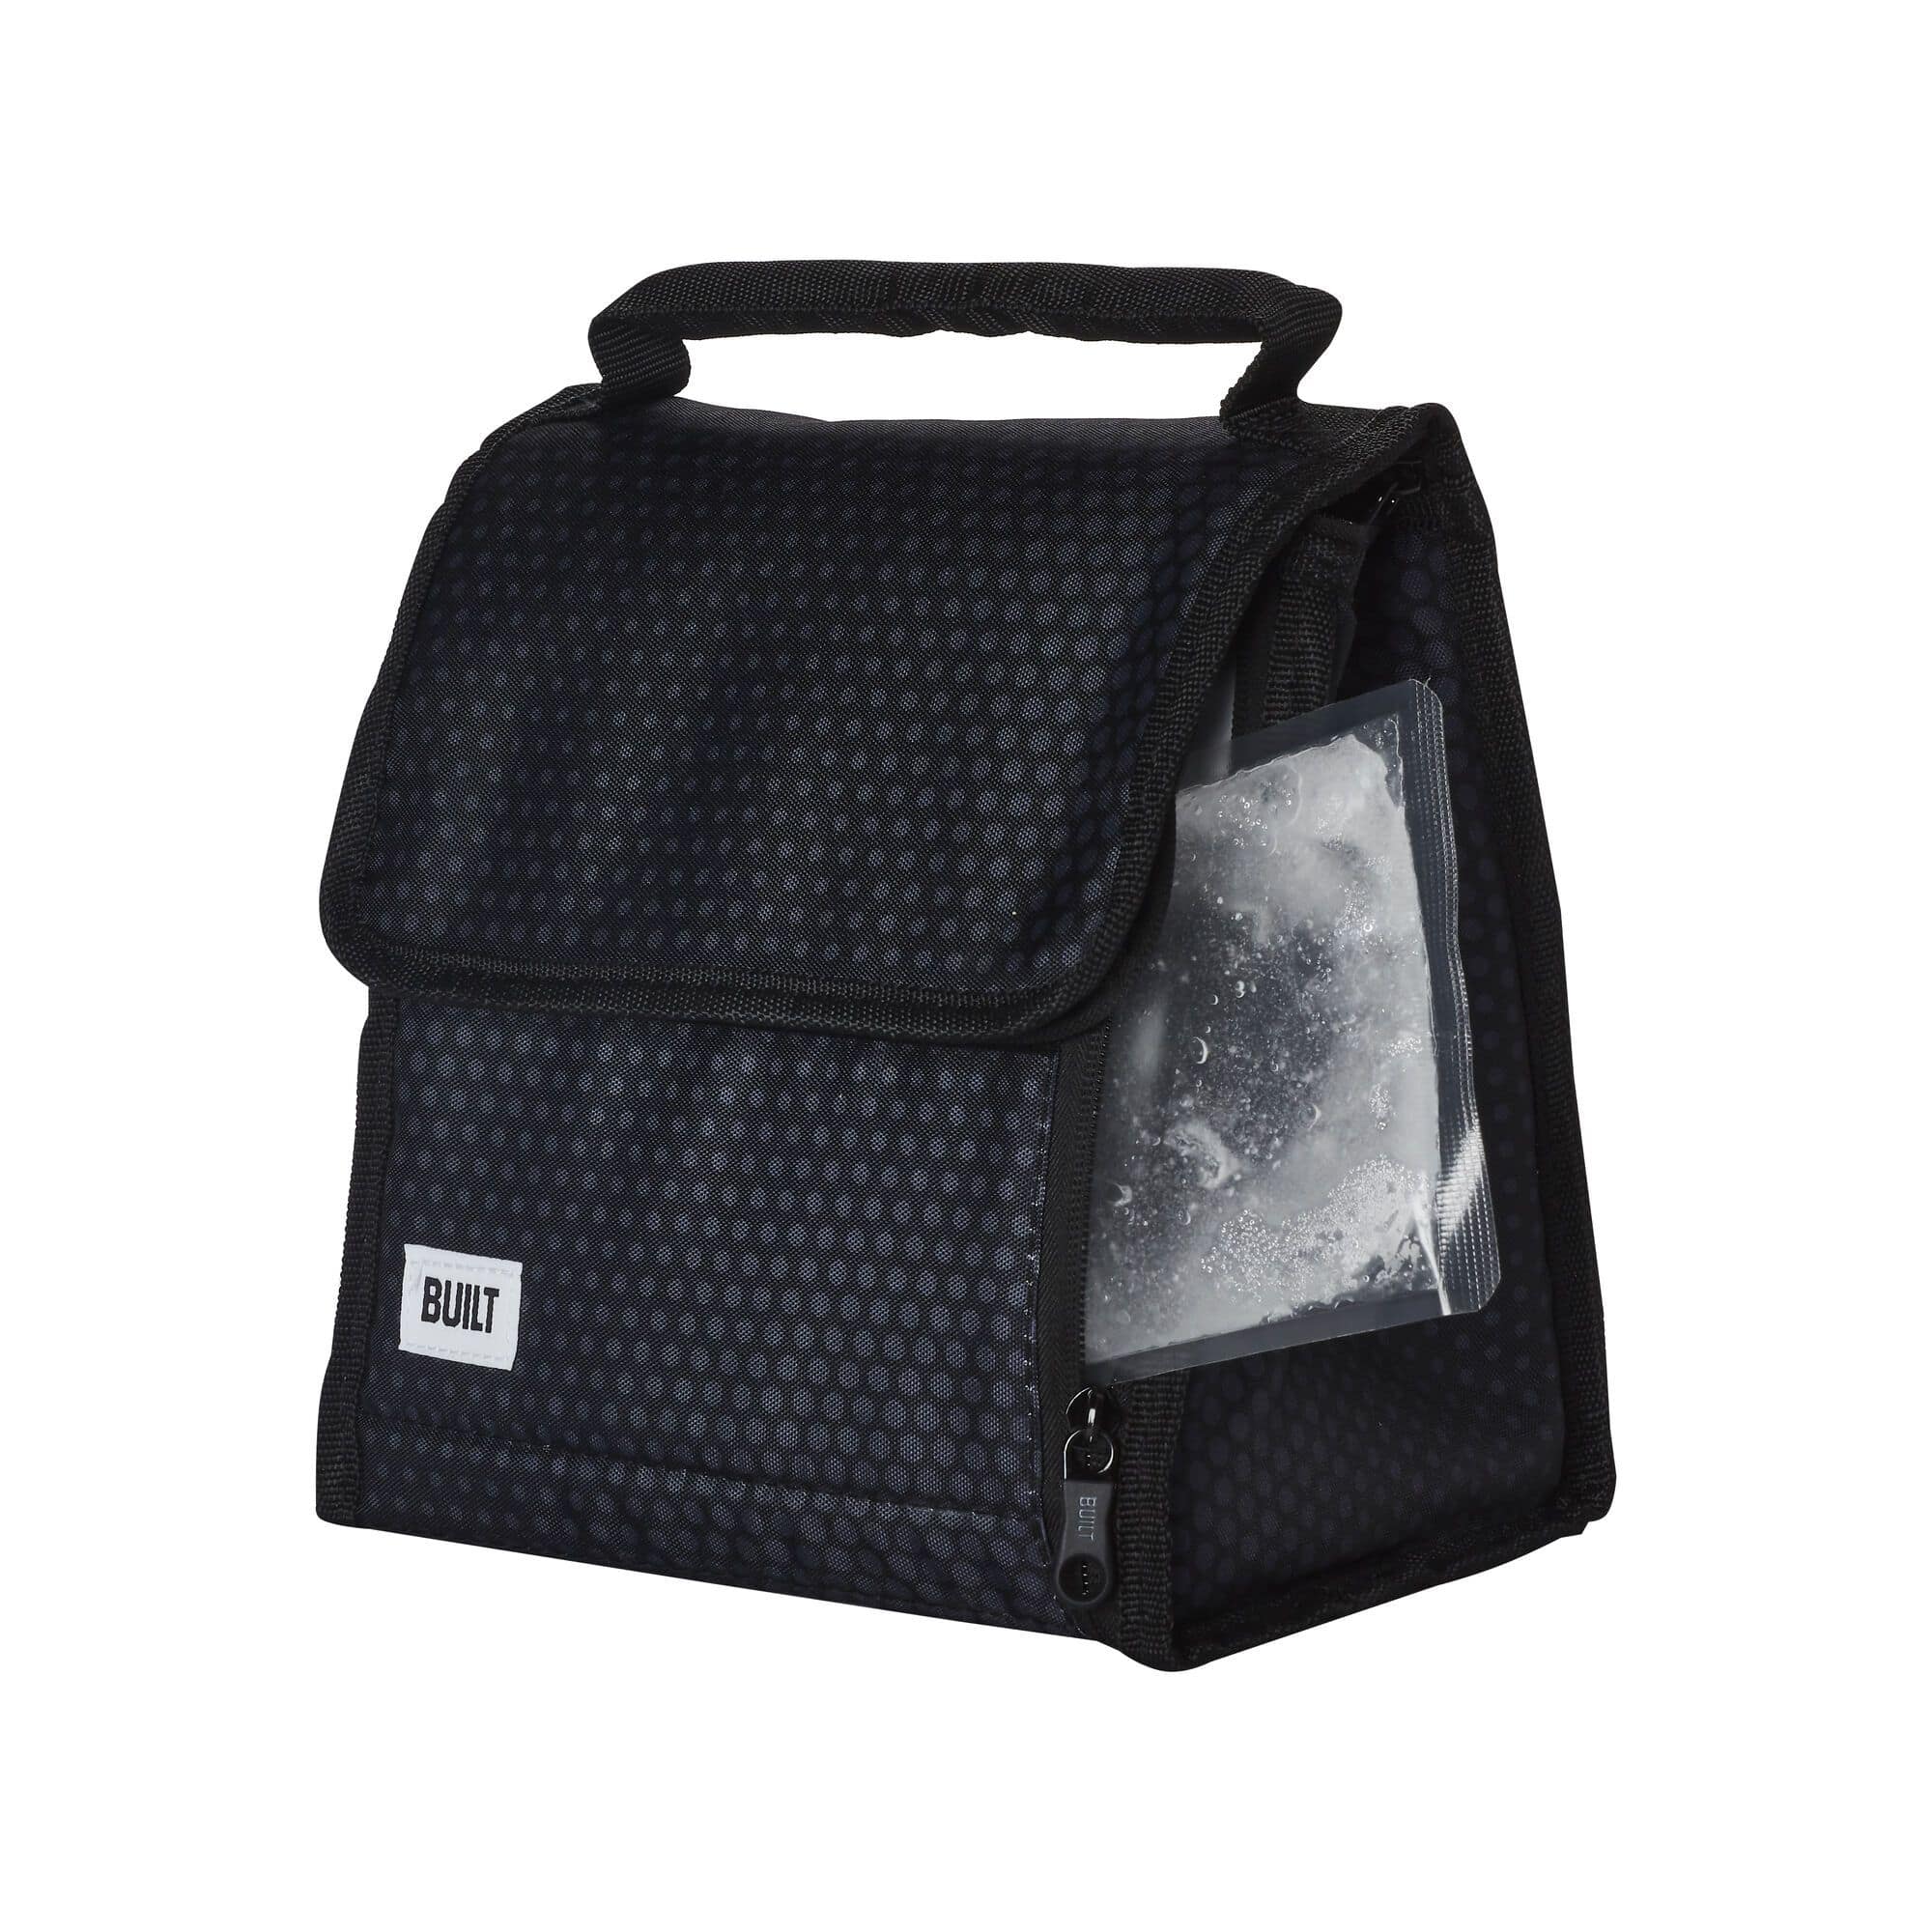 Packit Freezable Lunch Box, Midnight, Black